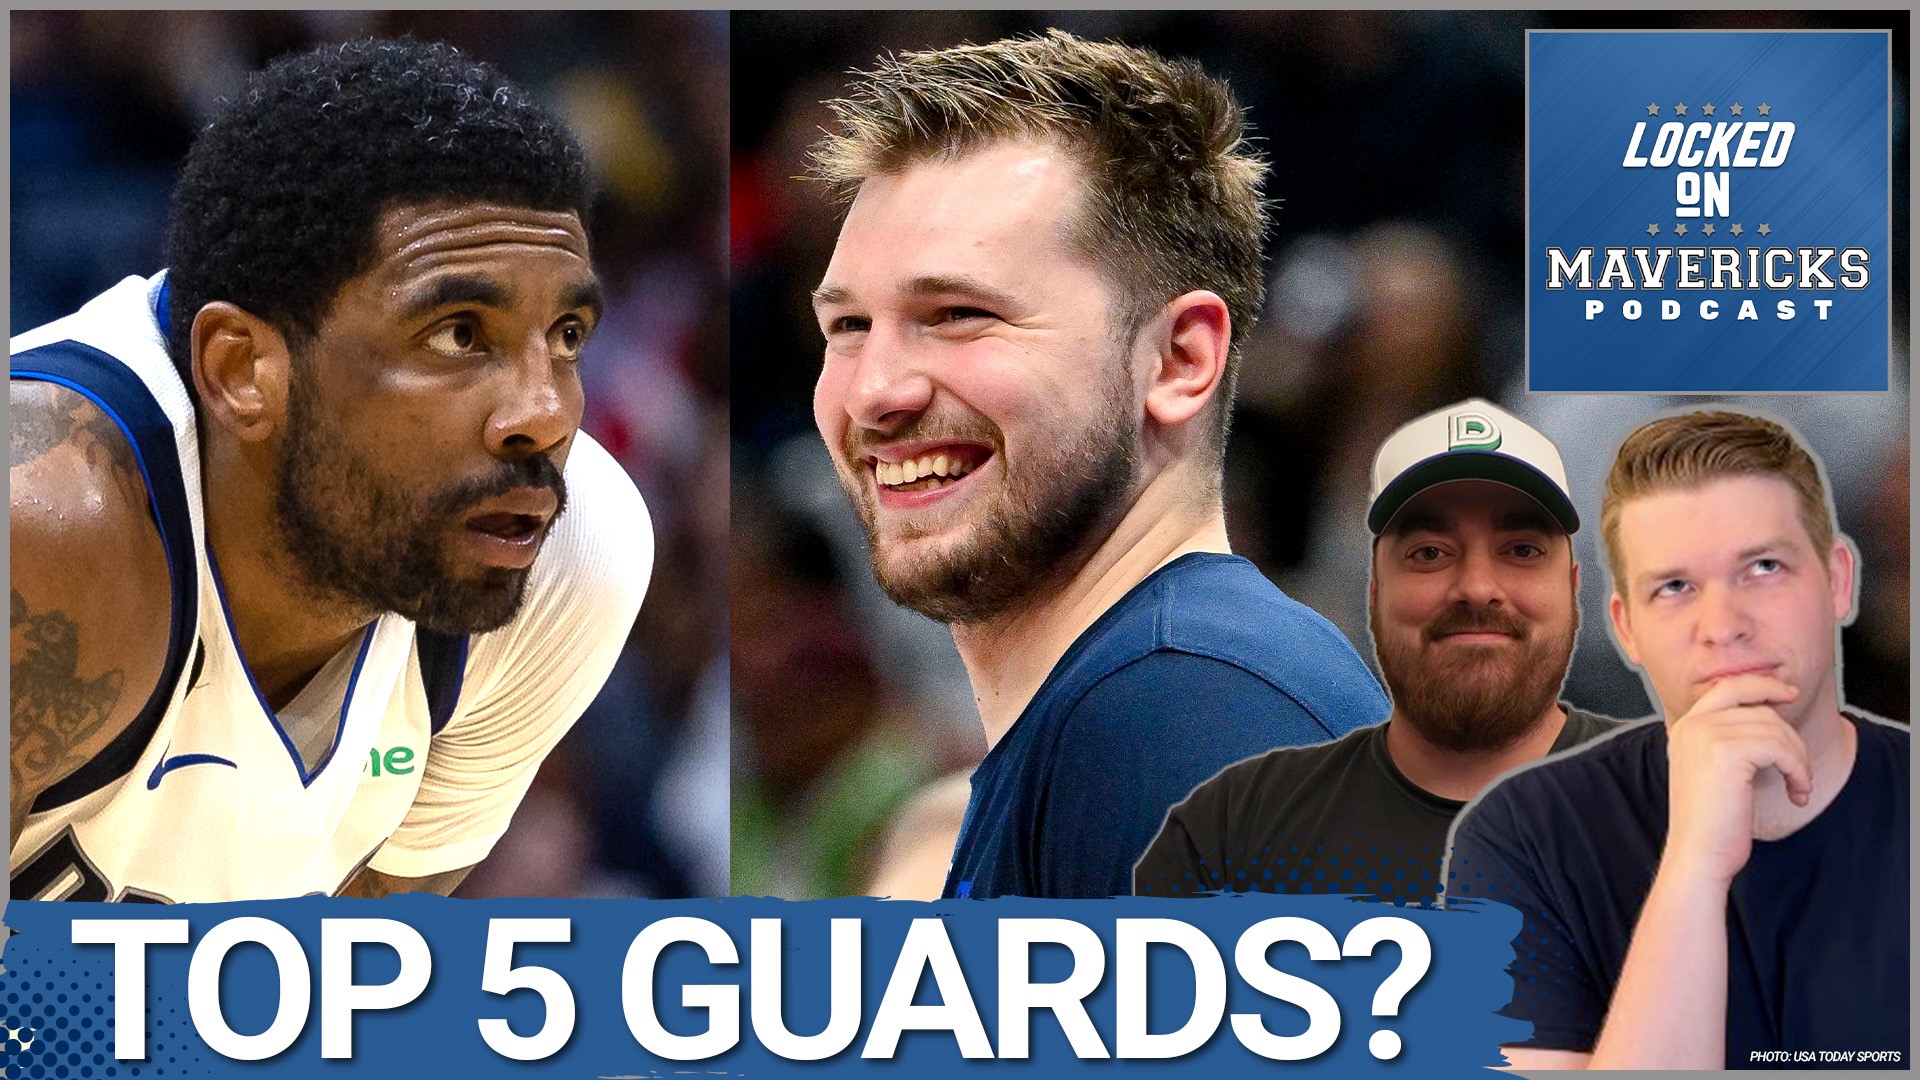 Nick Angstadt & Isaac Harris rank the best guards in the NBA and ask if the Dallas Mavericks have two Top 5 guards in Luka Doncic & Kyrie Irving.